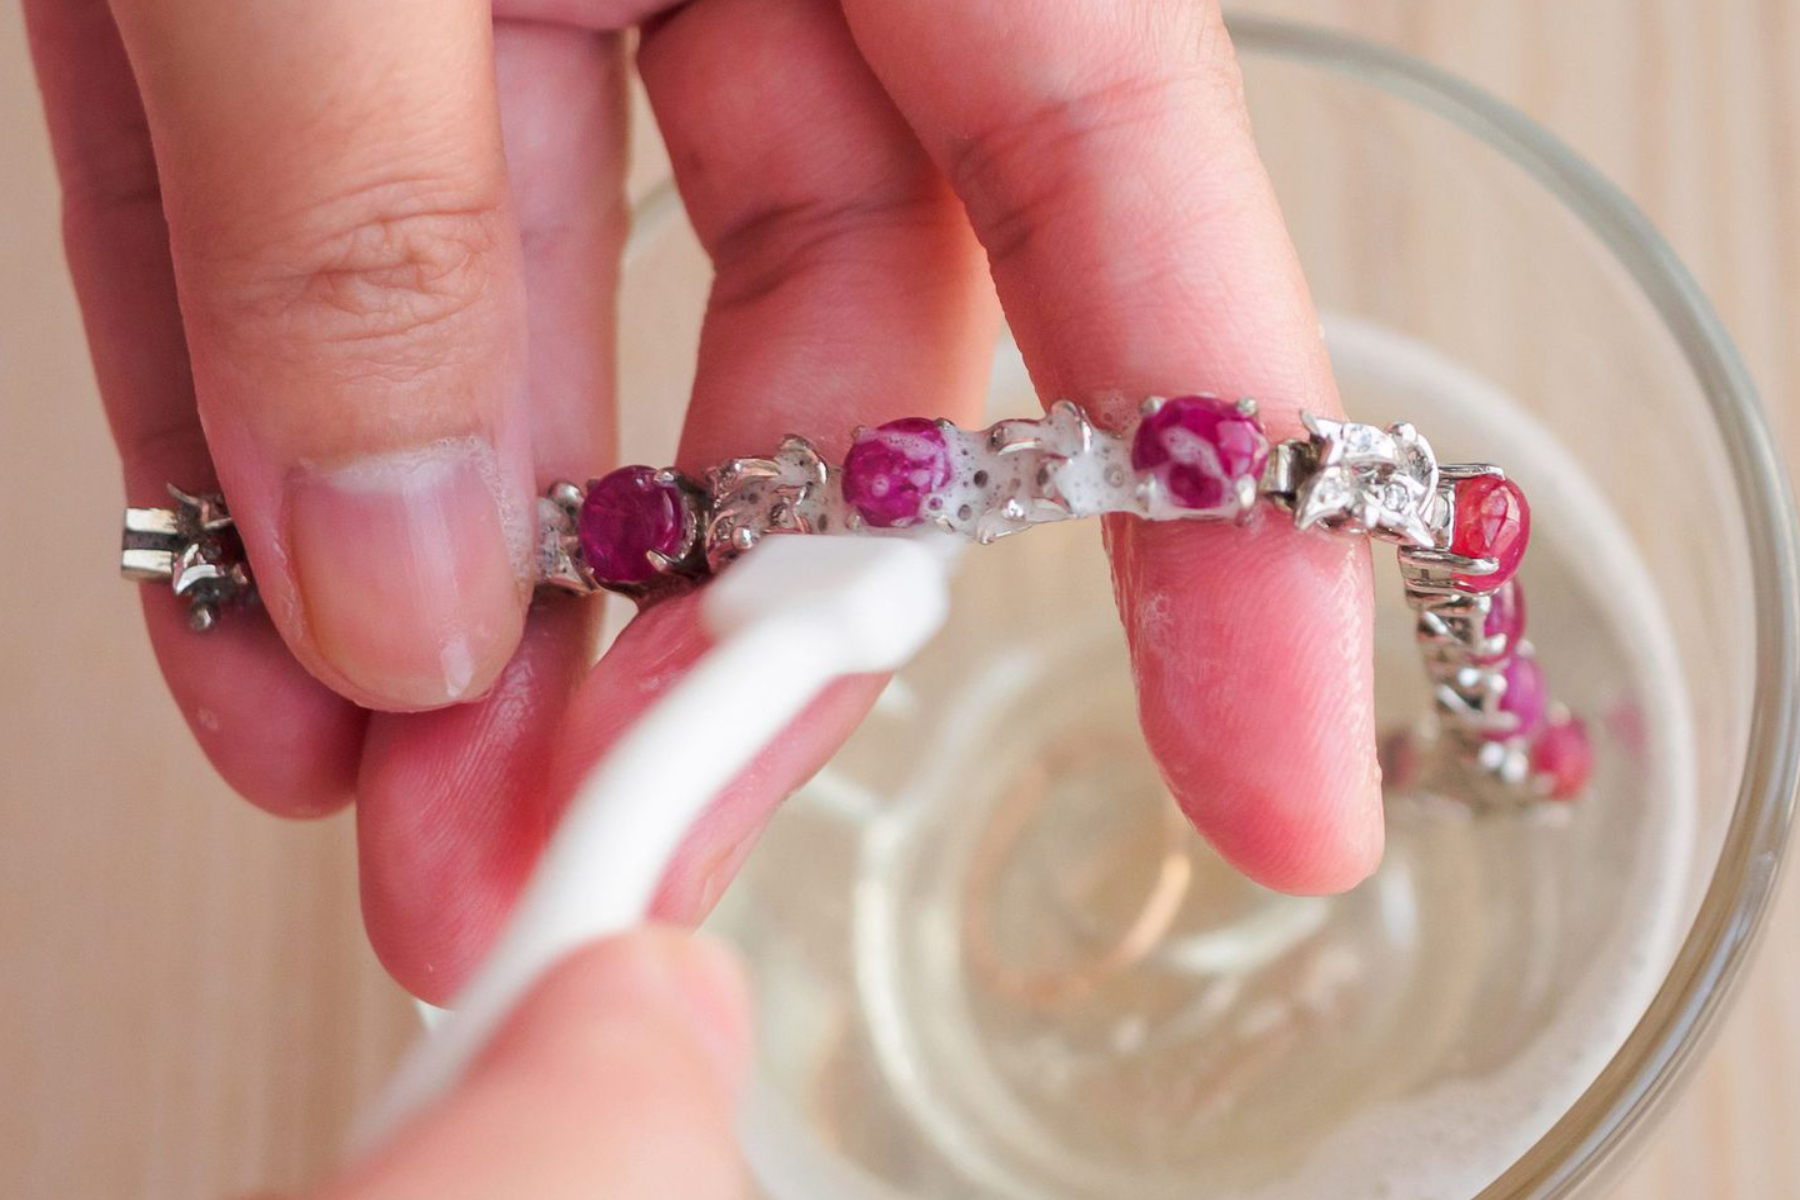 A woman's hand cleaning elegant pink bracelets with a soft brush and water